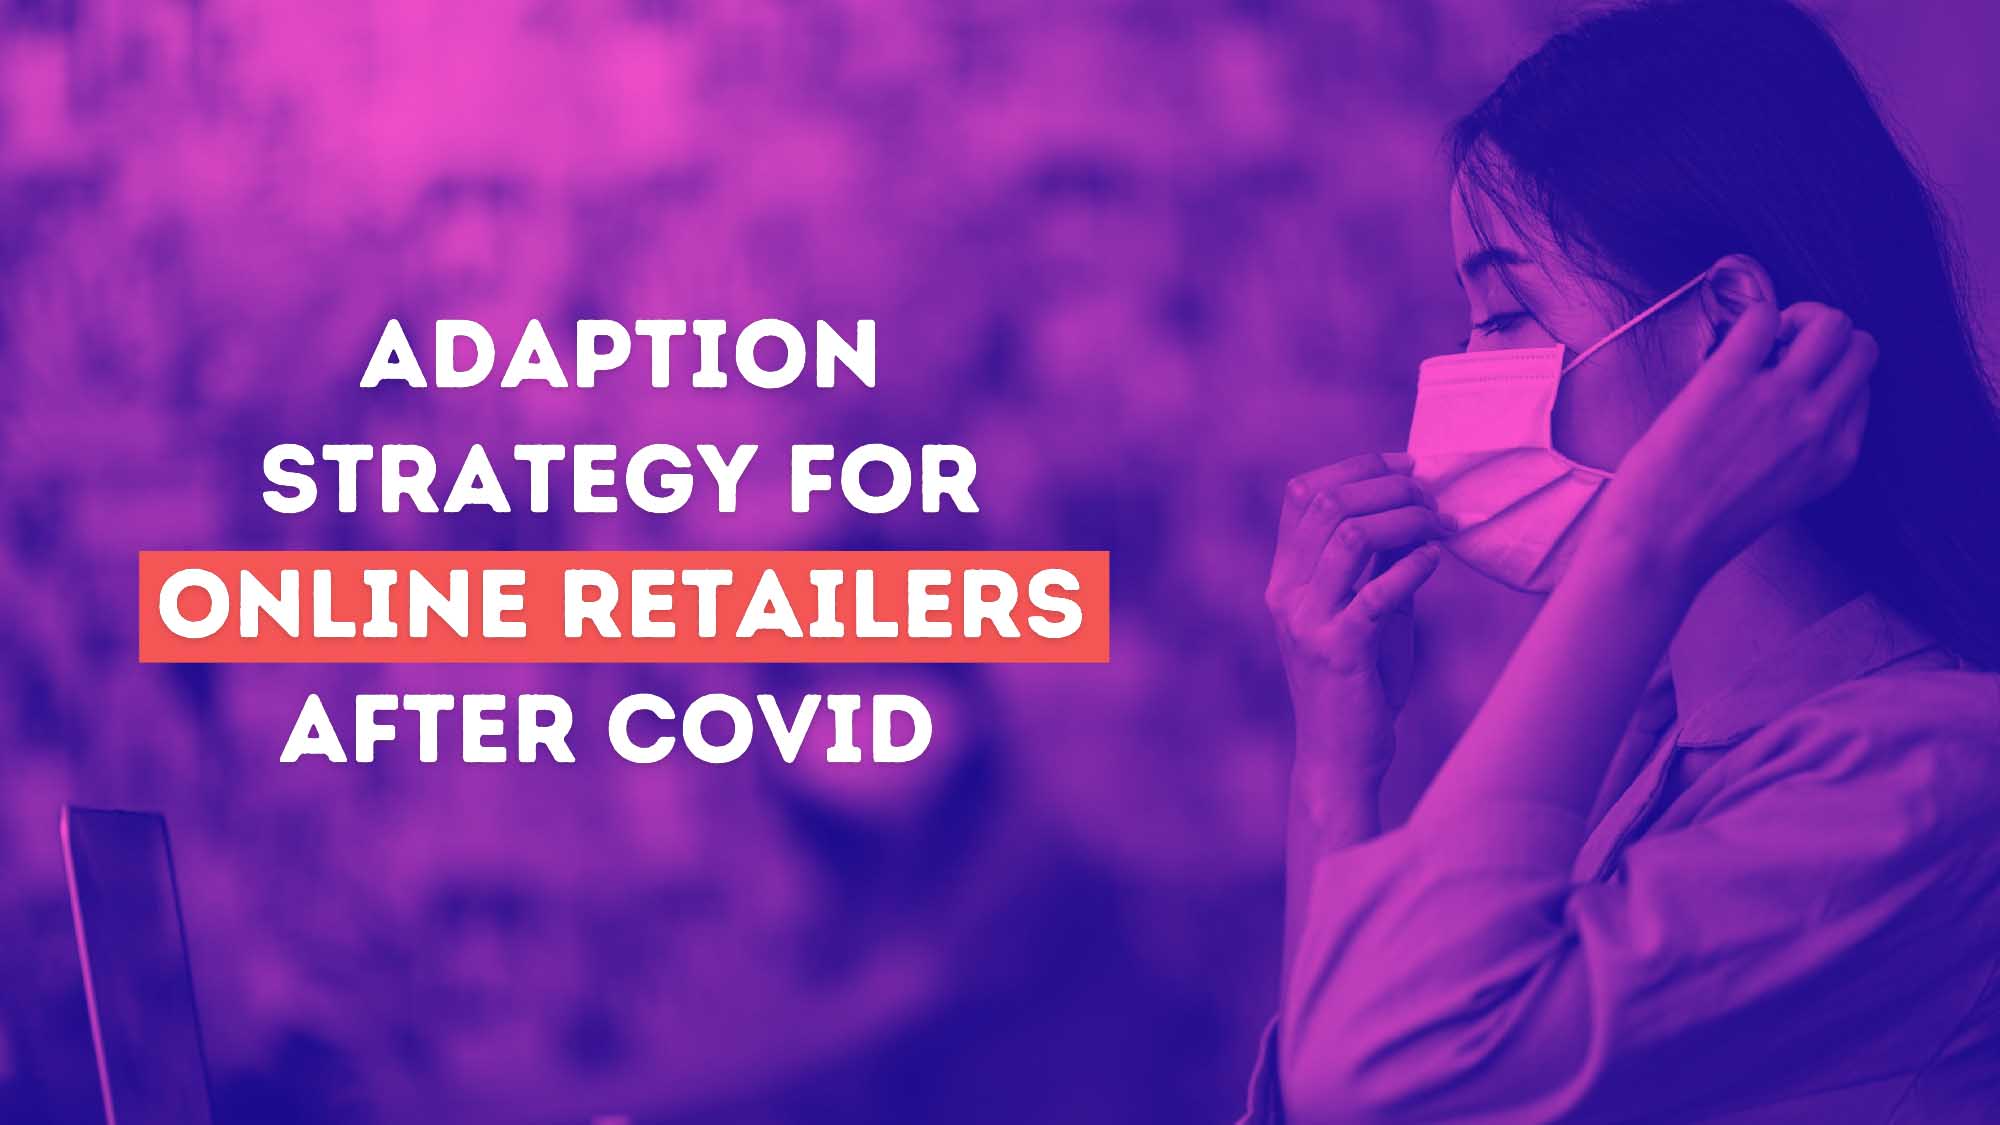 Effects of COVID-19 on Online Retailers & How They Can Adapt in 2021